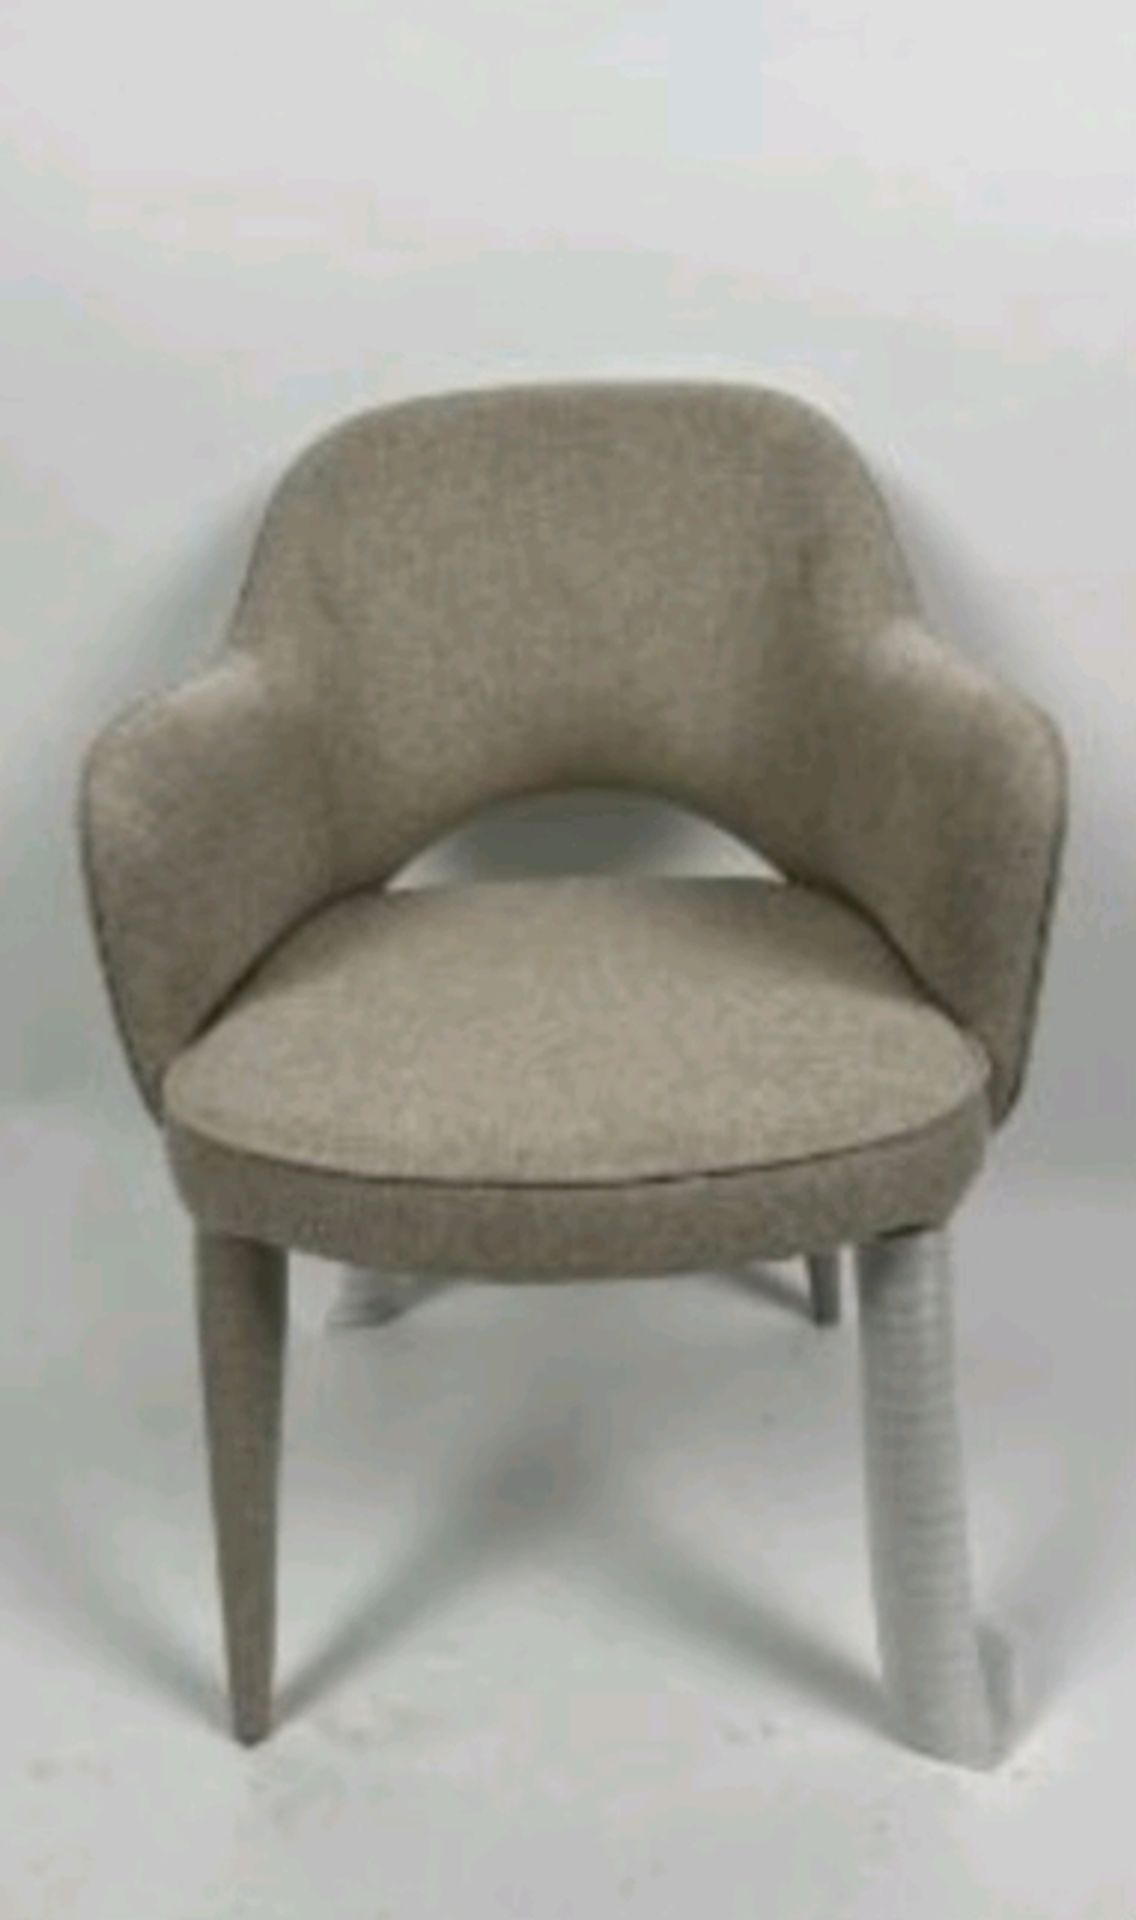 Pols Potten Holy Padded Armchair Ecru - Image 3 of 4